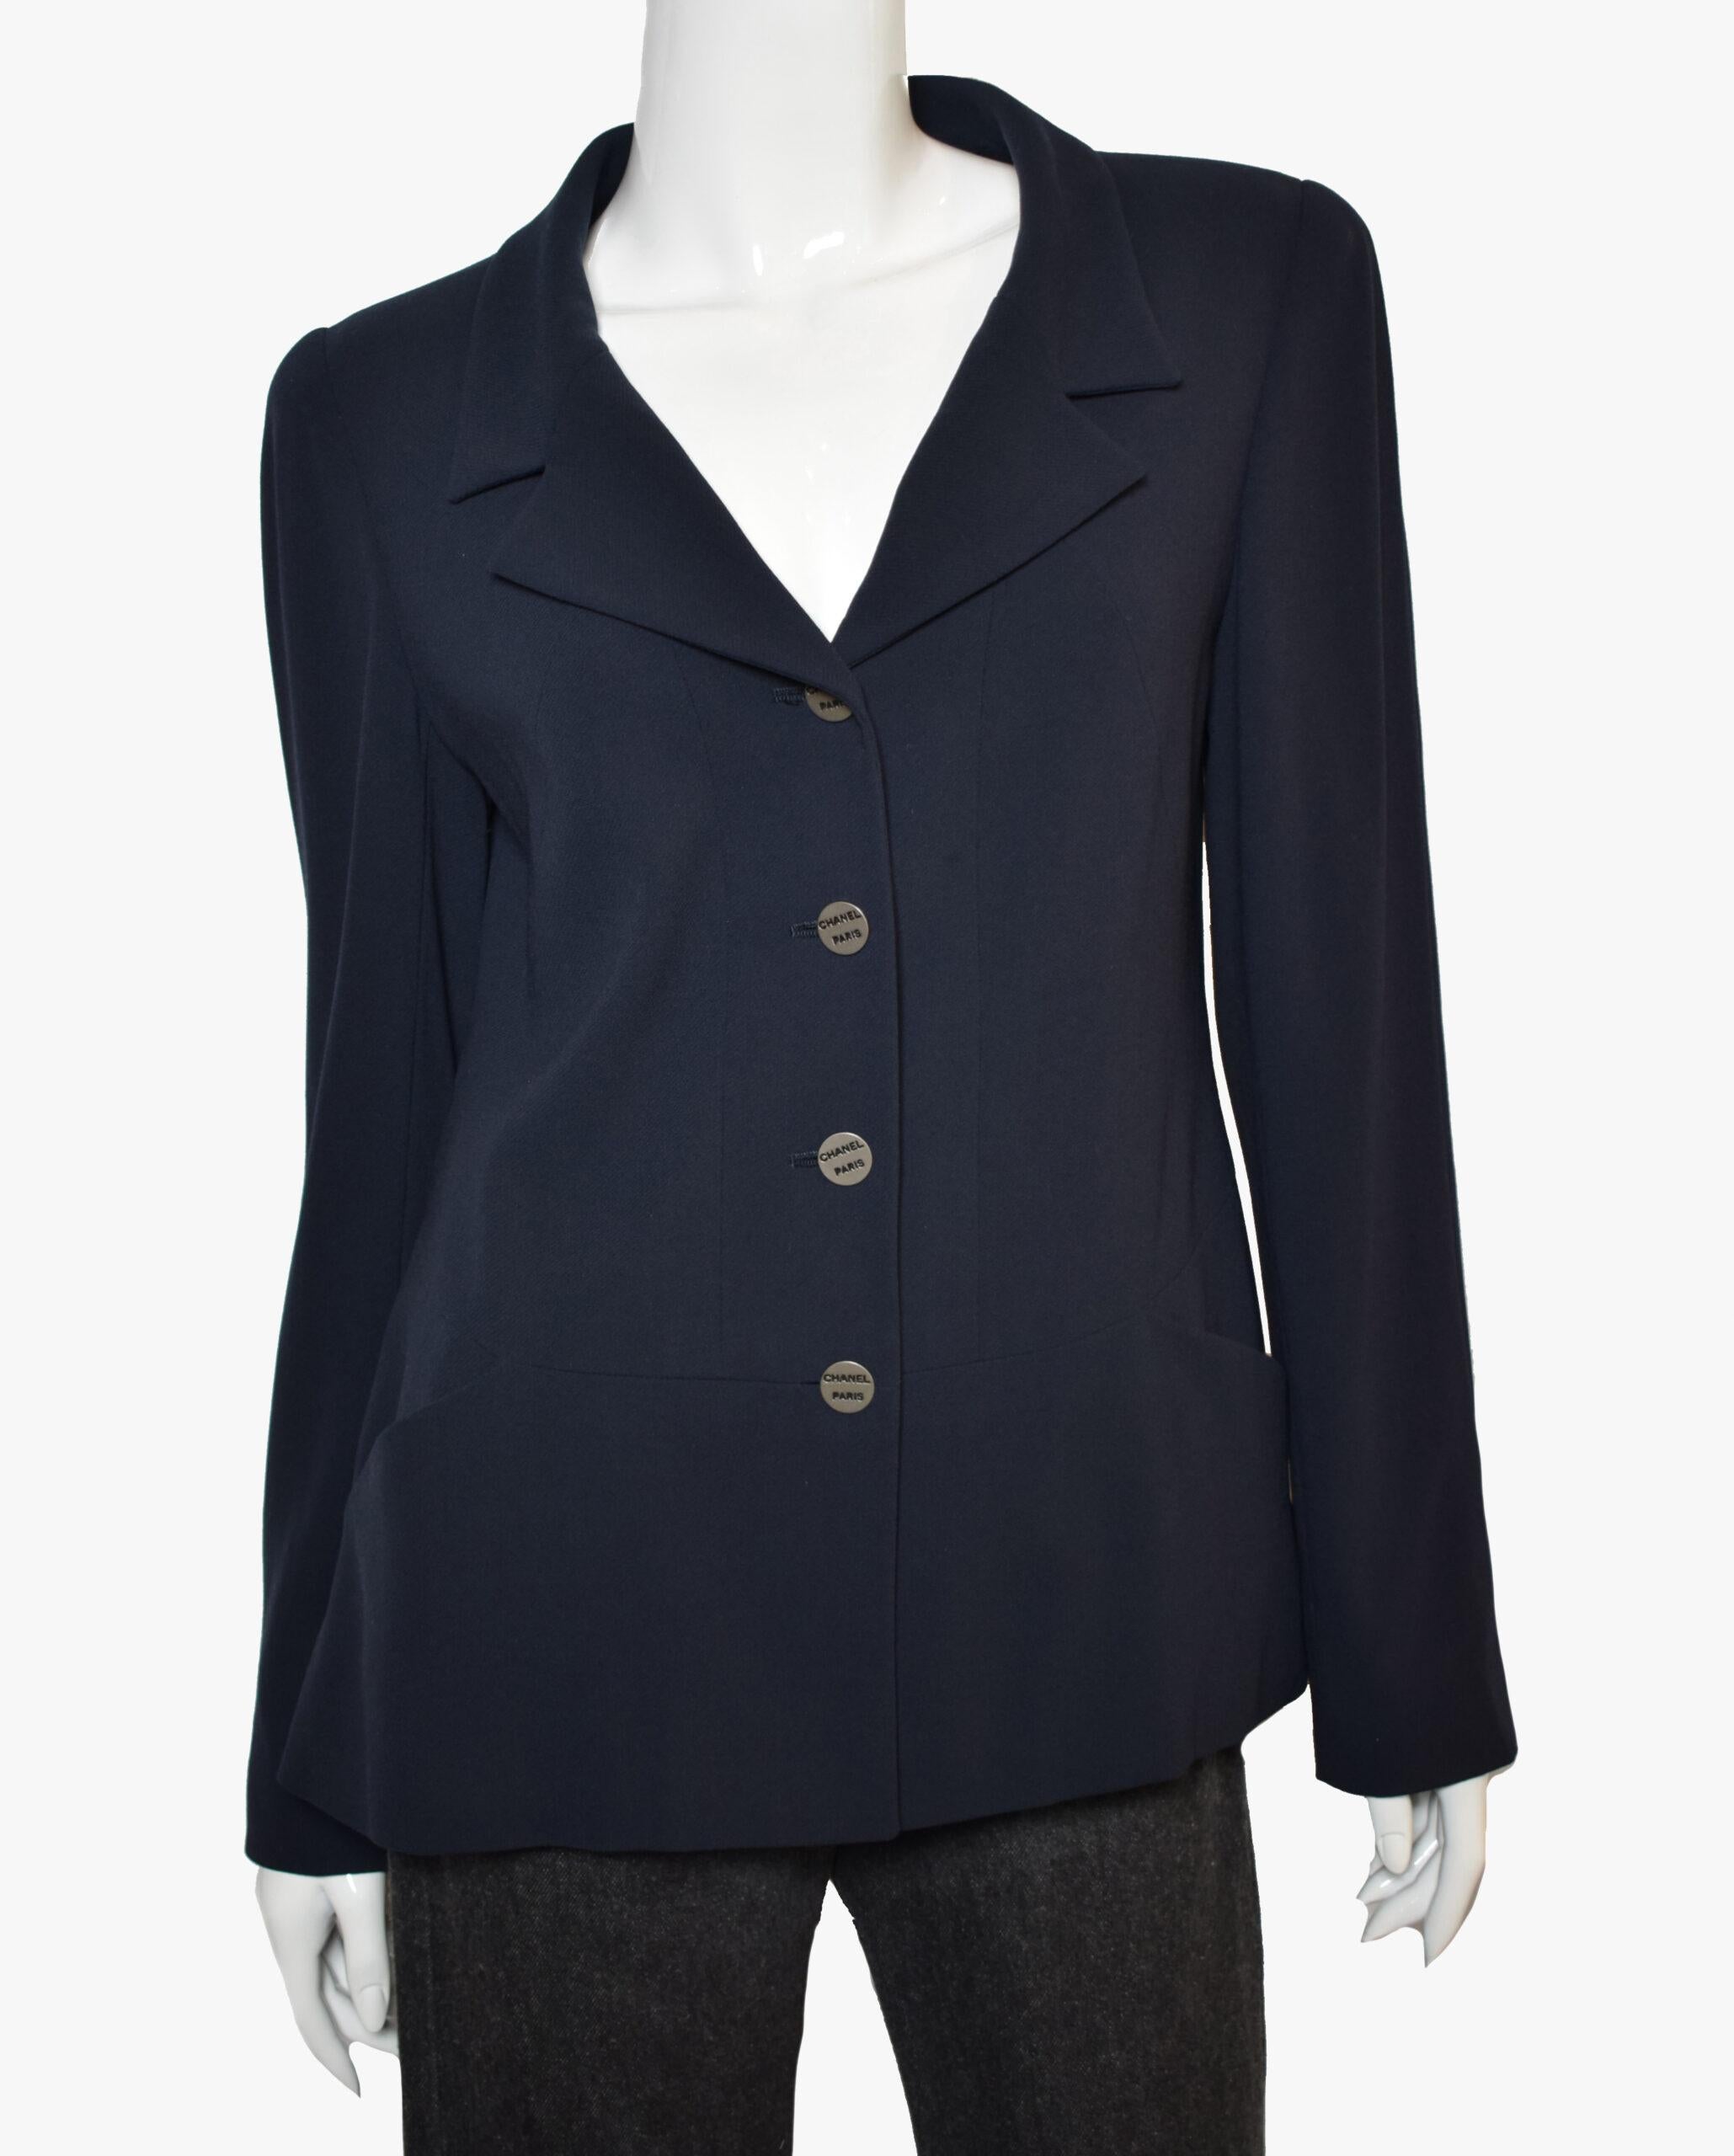 Chanel wool blazer from the Cruise 2000 Collection by Karl Lagerfeld. 
Blue color, Pointed Collar, Slit Pockets & Button Closure

Fabric: 100% Wool; Lining 100% Silk
Size: L / US10, FR42
Bust: 34″/ 86 cm
Waist: 32″/ 81 cm
Shoulder: 15″/ 38cm
Length: